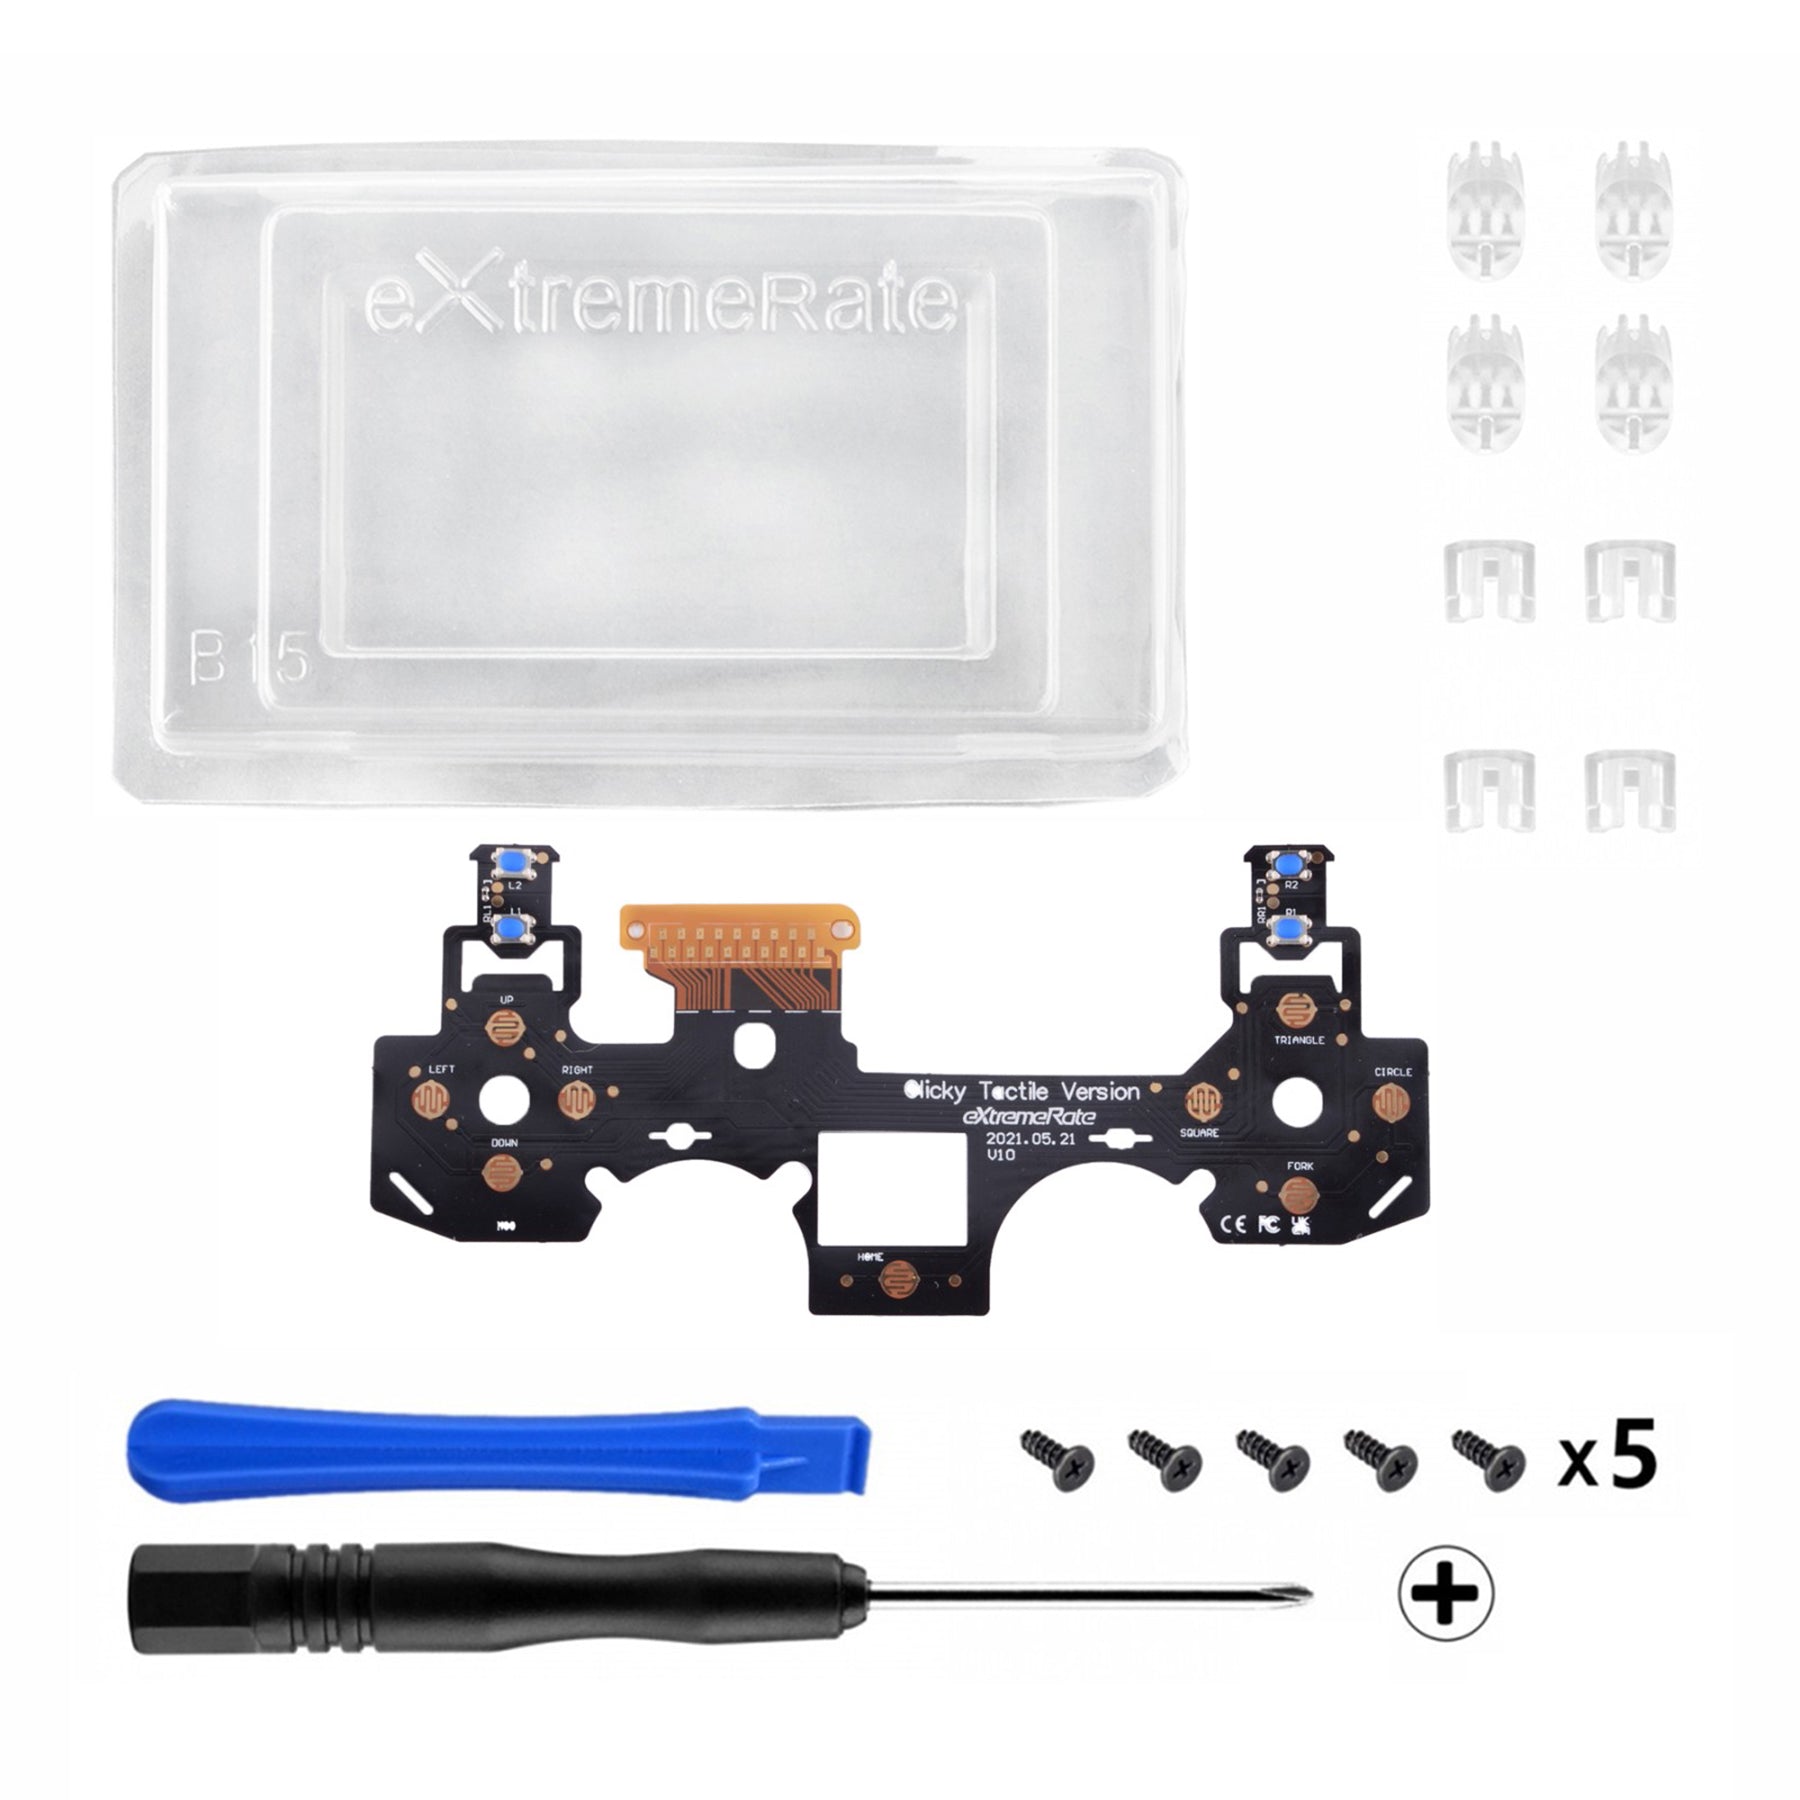 eXtremeRate Retail Tactile Version Clicky Hair Trigger Kit for ps4 Controller Shoulder Buttons, Custom Tactile Bumper Trigger Buttons for ps4 Slim Pro Controller, Mouse Click Kit for ps4 Controller CUH-ZCT2 JDM-040/050/055 - P4MD002